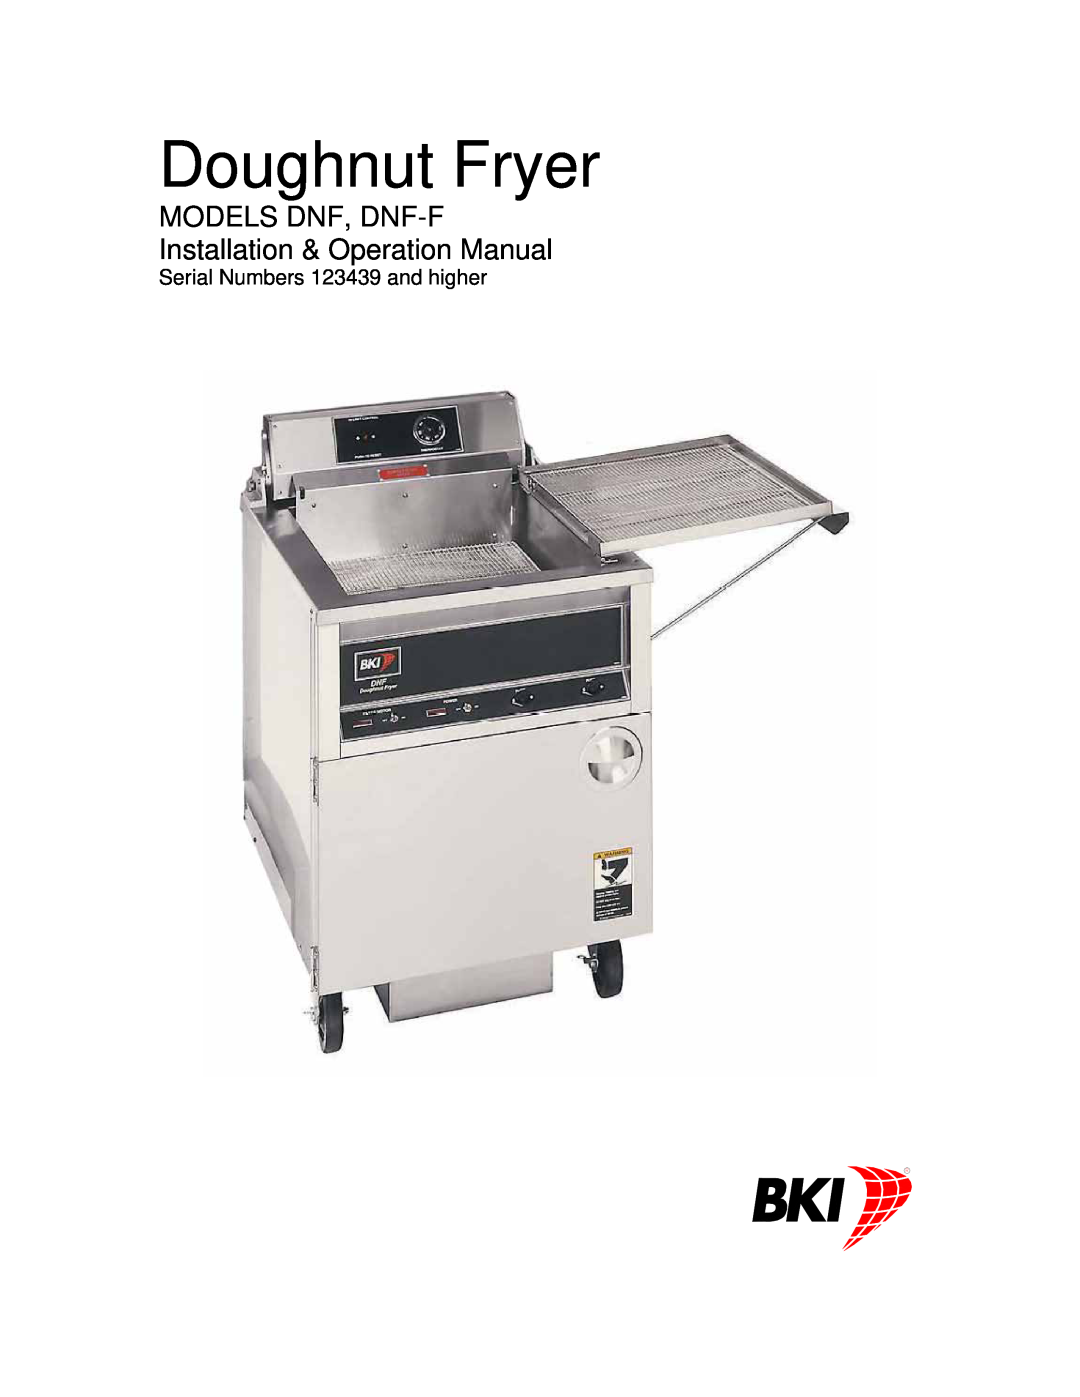 Bakers Pride Oven DNF-F operation manual Doughnut Fryer, Serial Numbers 123439 and higher 